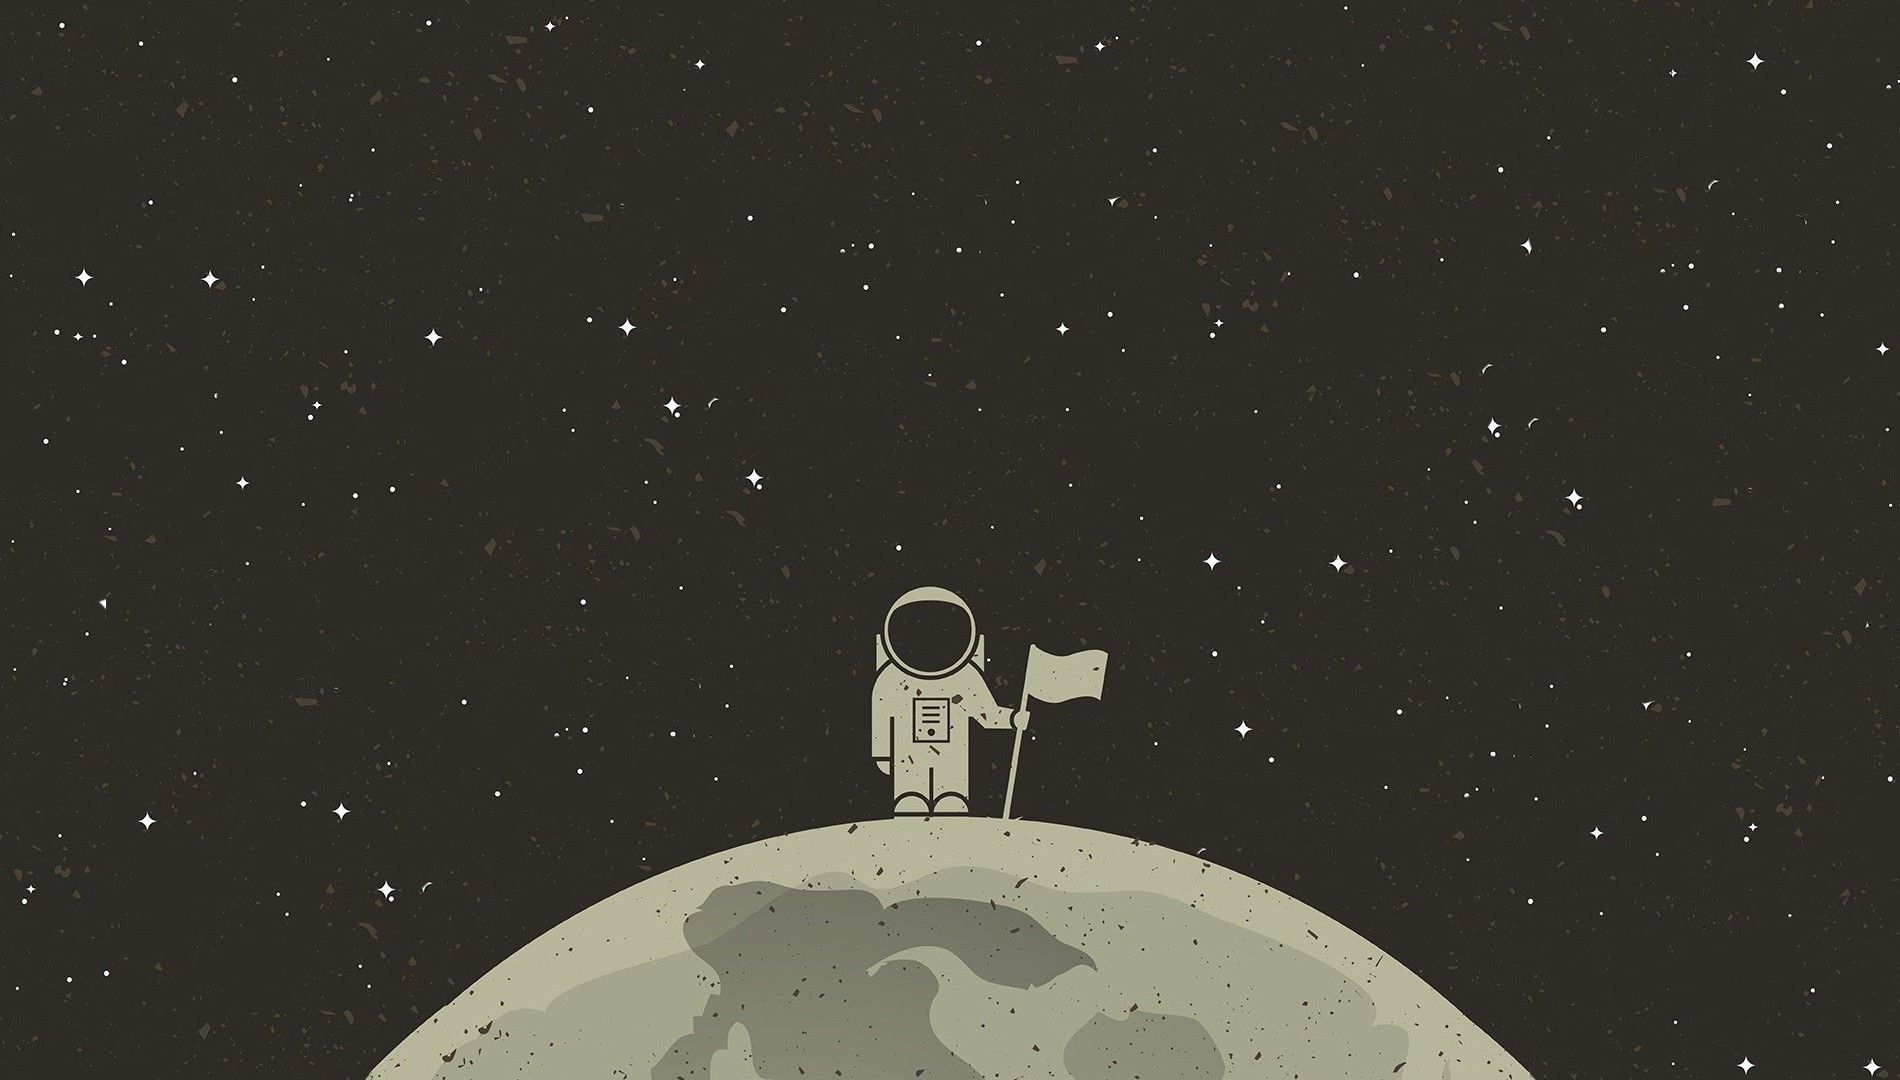 Aesthetic Astronaut PC Wallpapers - Wallpaper Cave